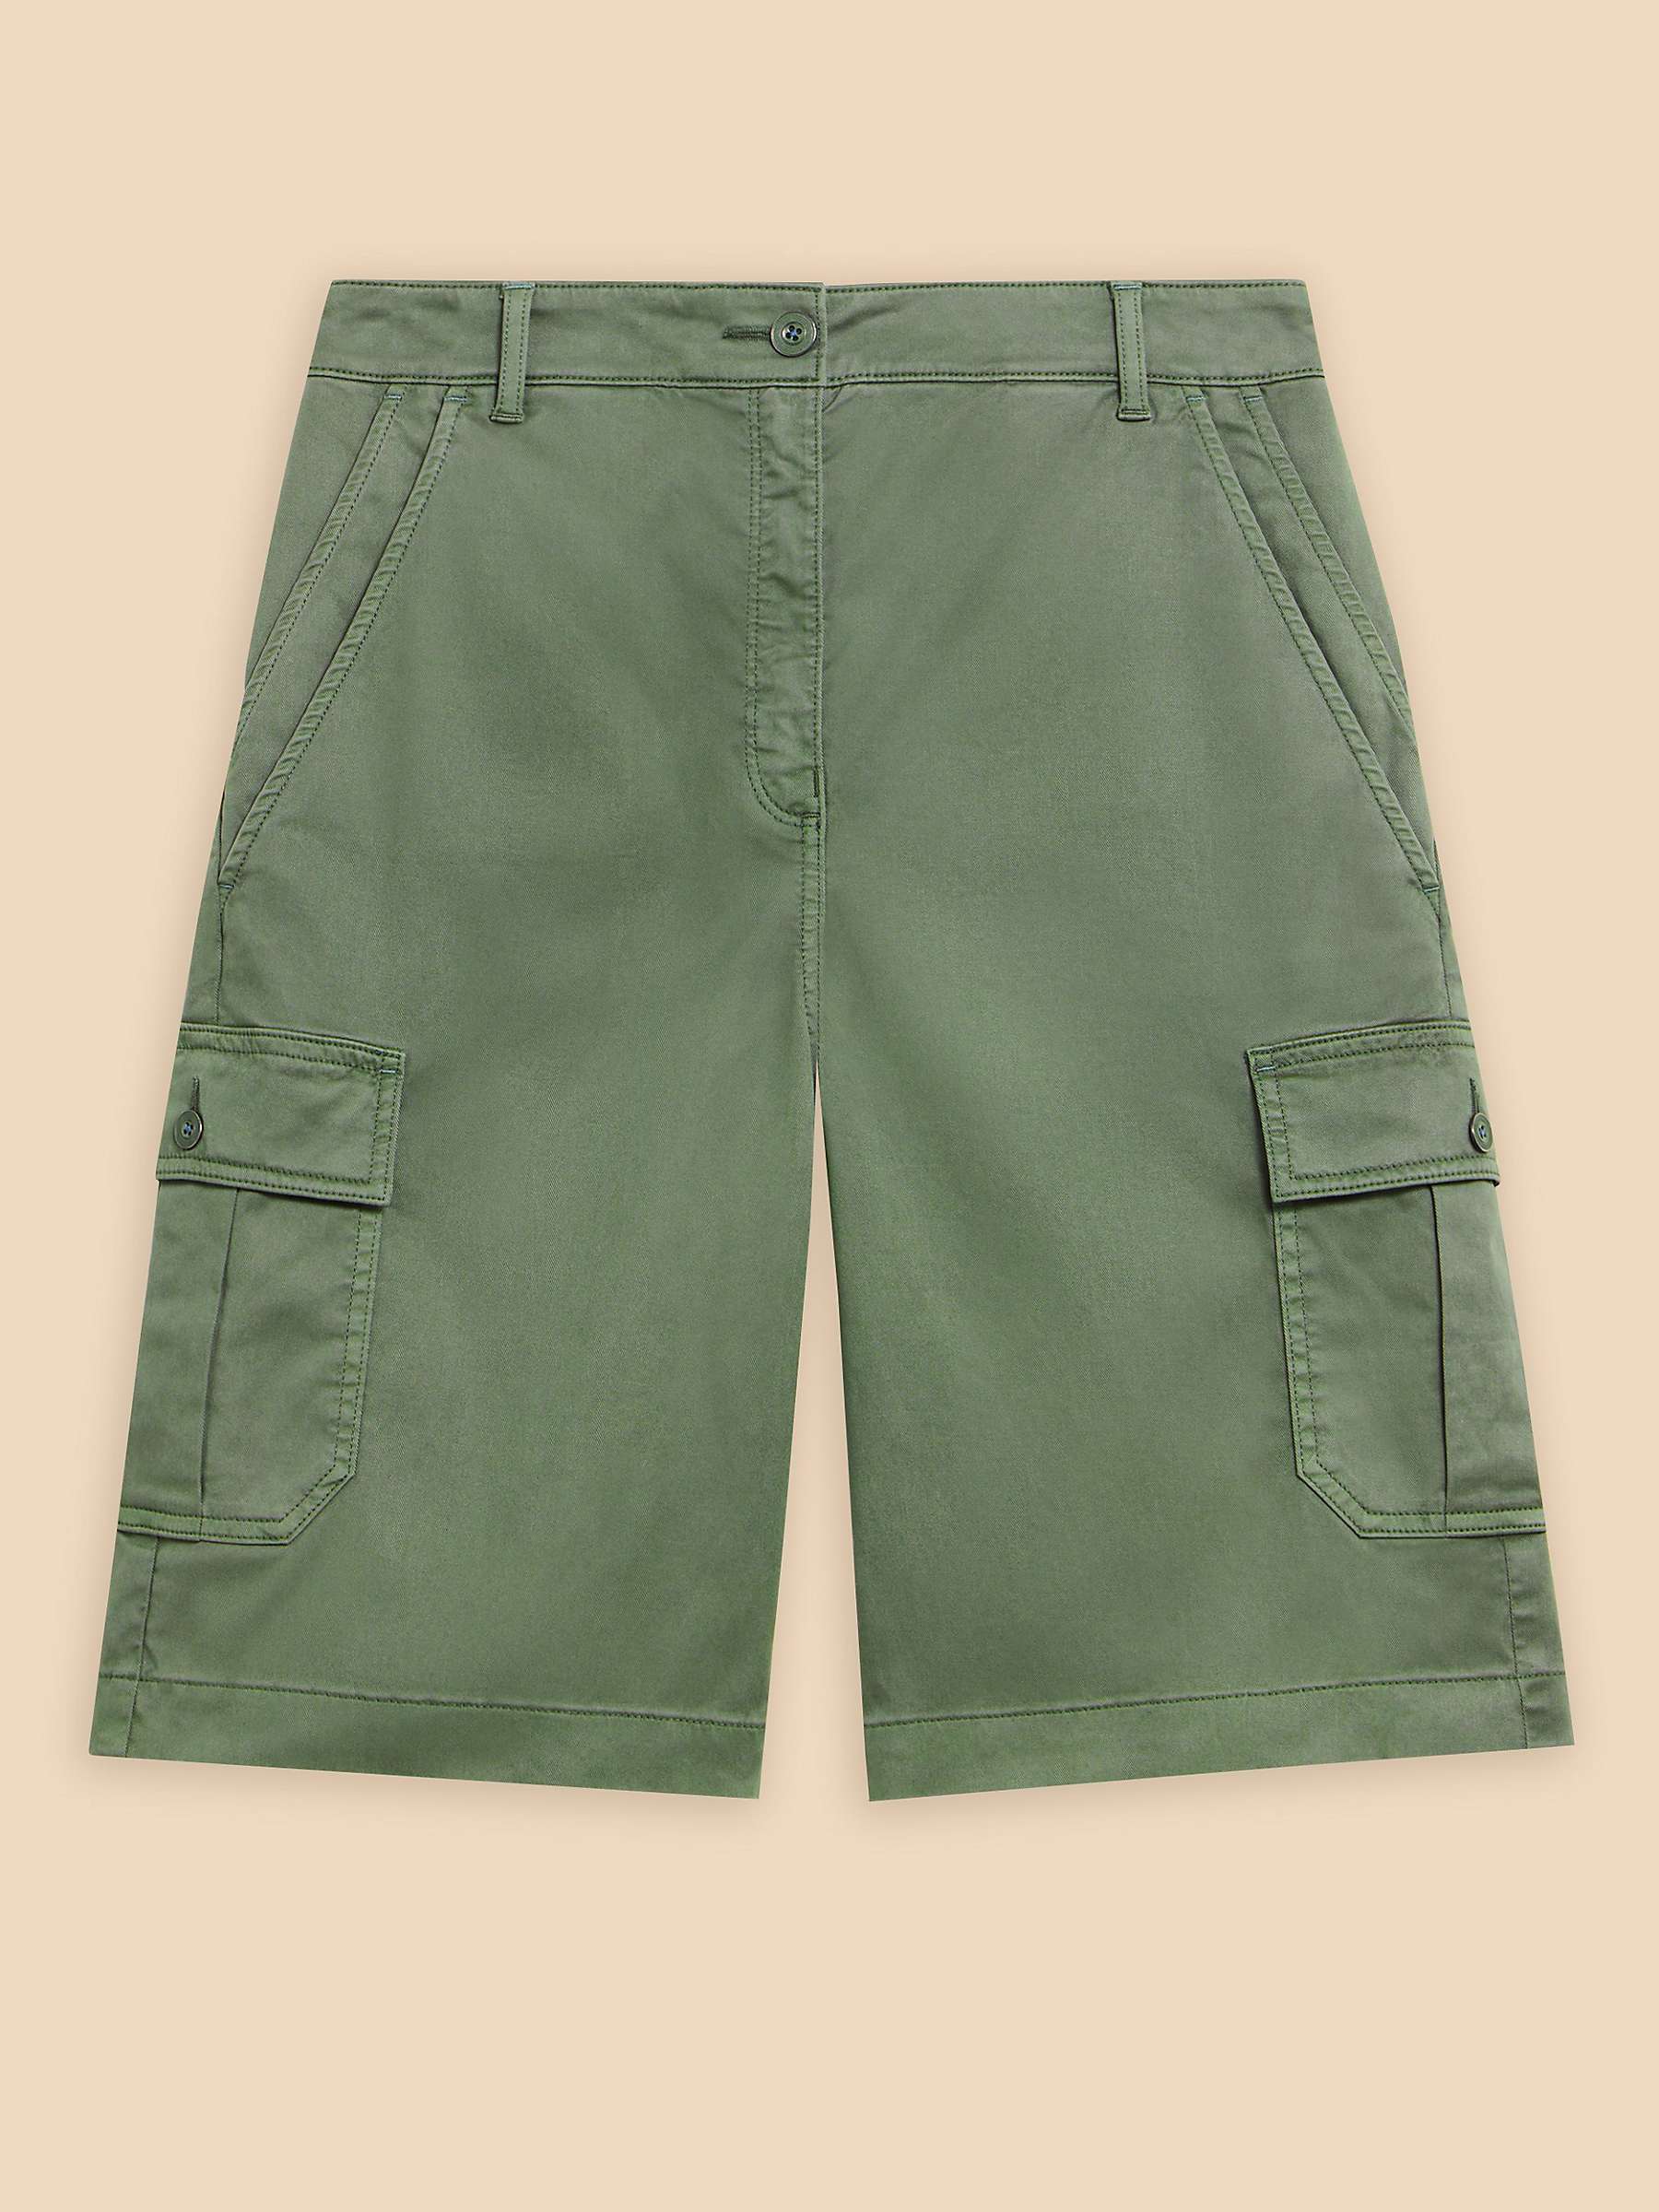 Buy White Stuff Everleigh Cargo Shorts, Mid Green Online at johnlewis.com